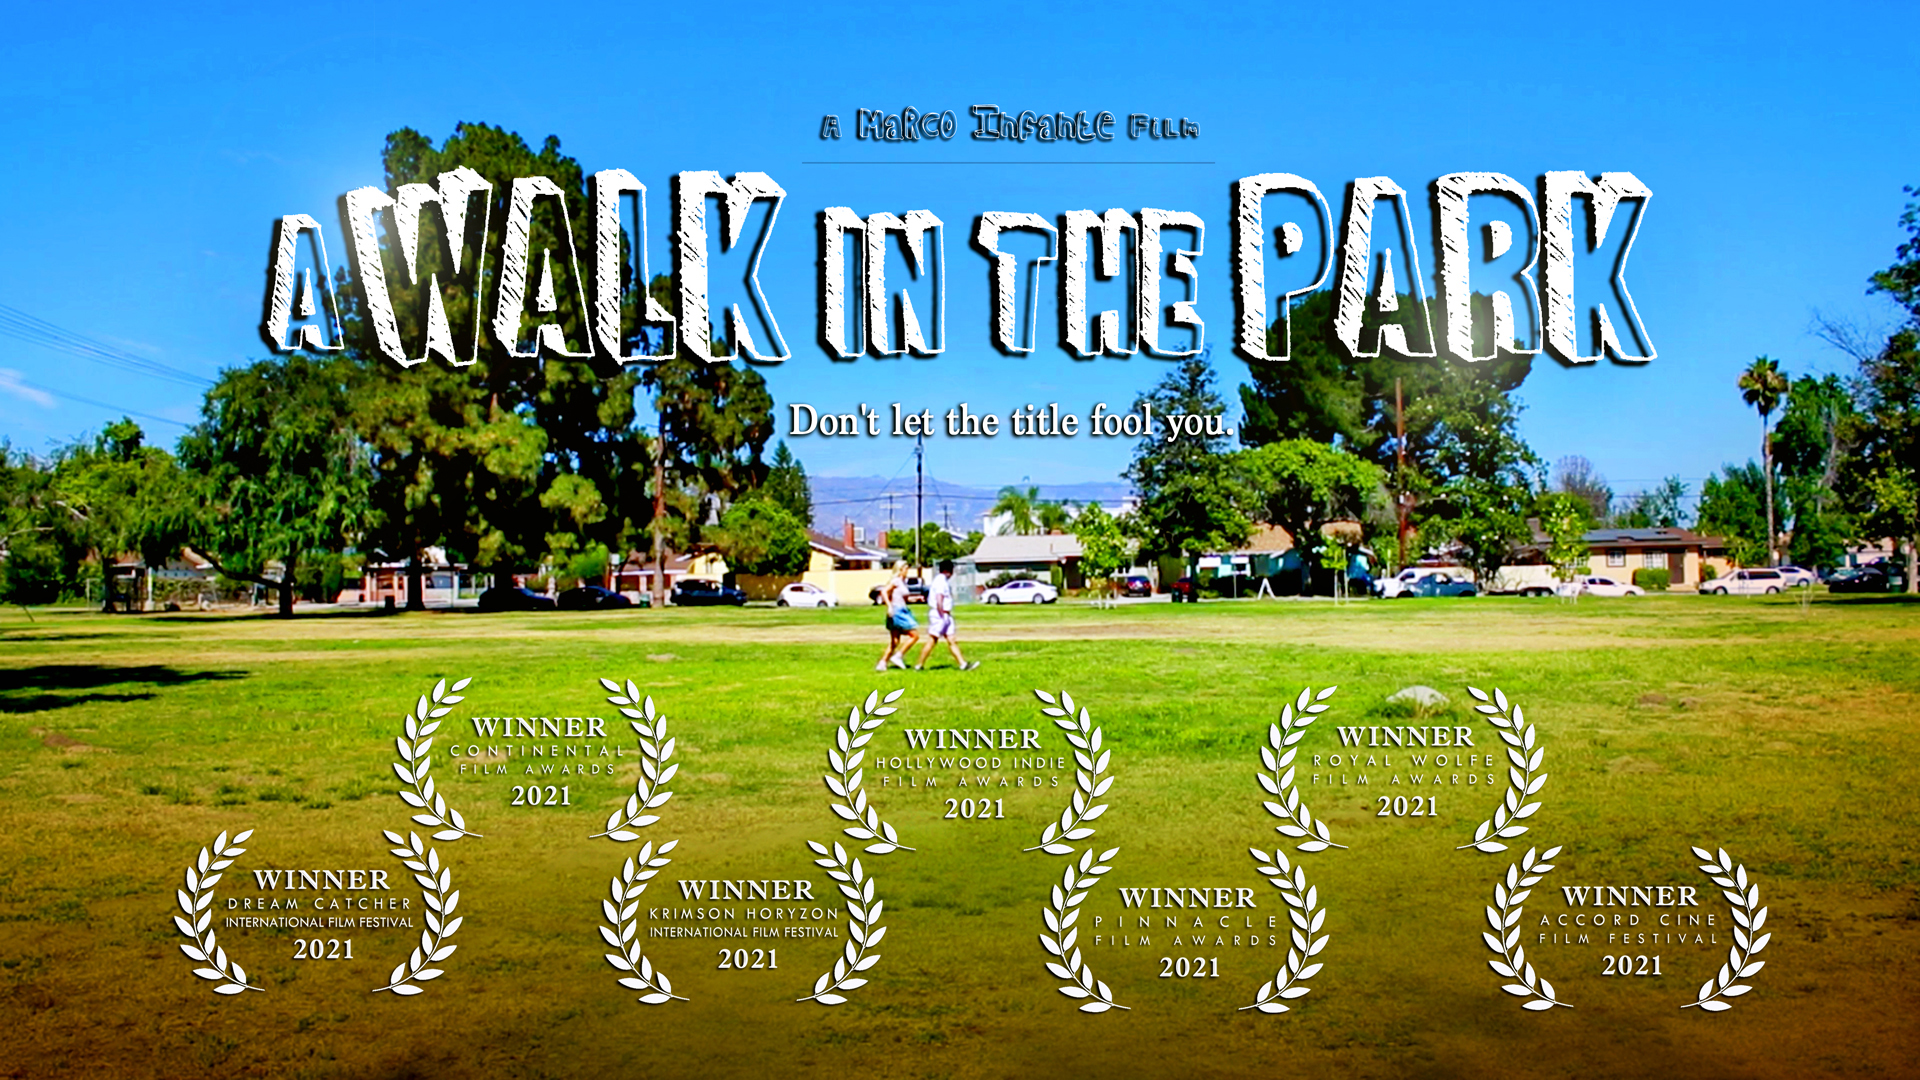 Walk in the Park Marco infante